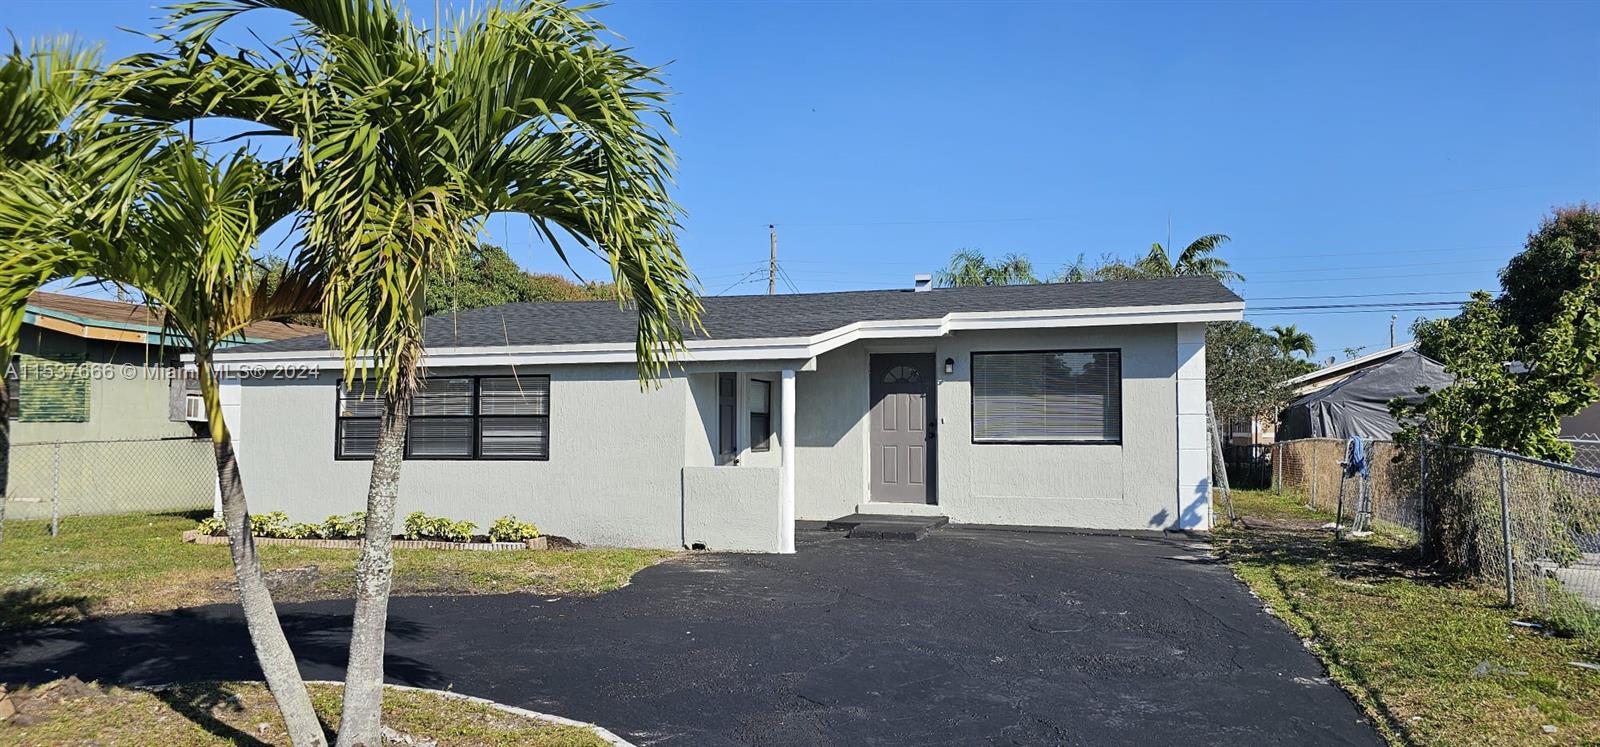 Property for Sale at 3021 Nw 7th Ct Ct, Fort Lauderdale, Broward County, Florida - Bedrooms: 3 
Bathrooms: 1  - $369,000